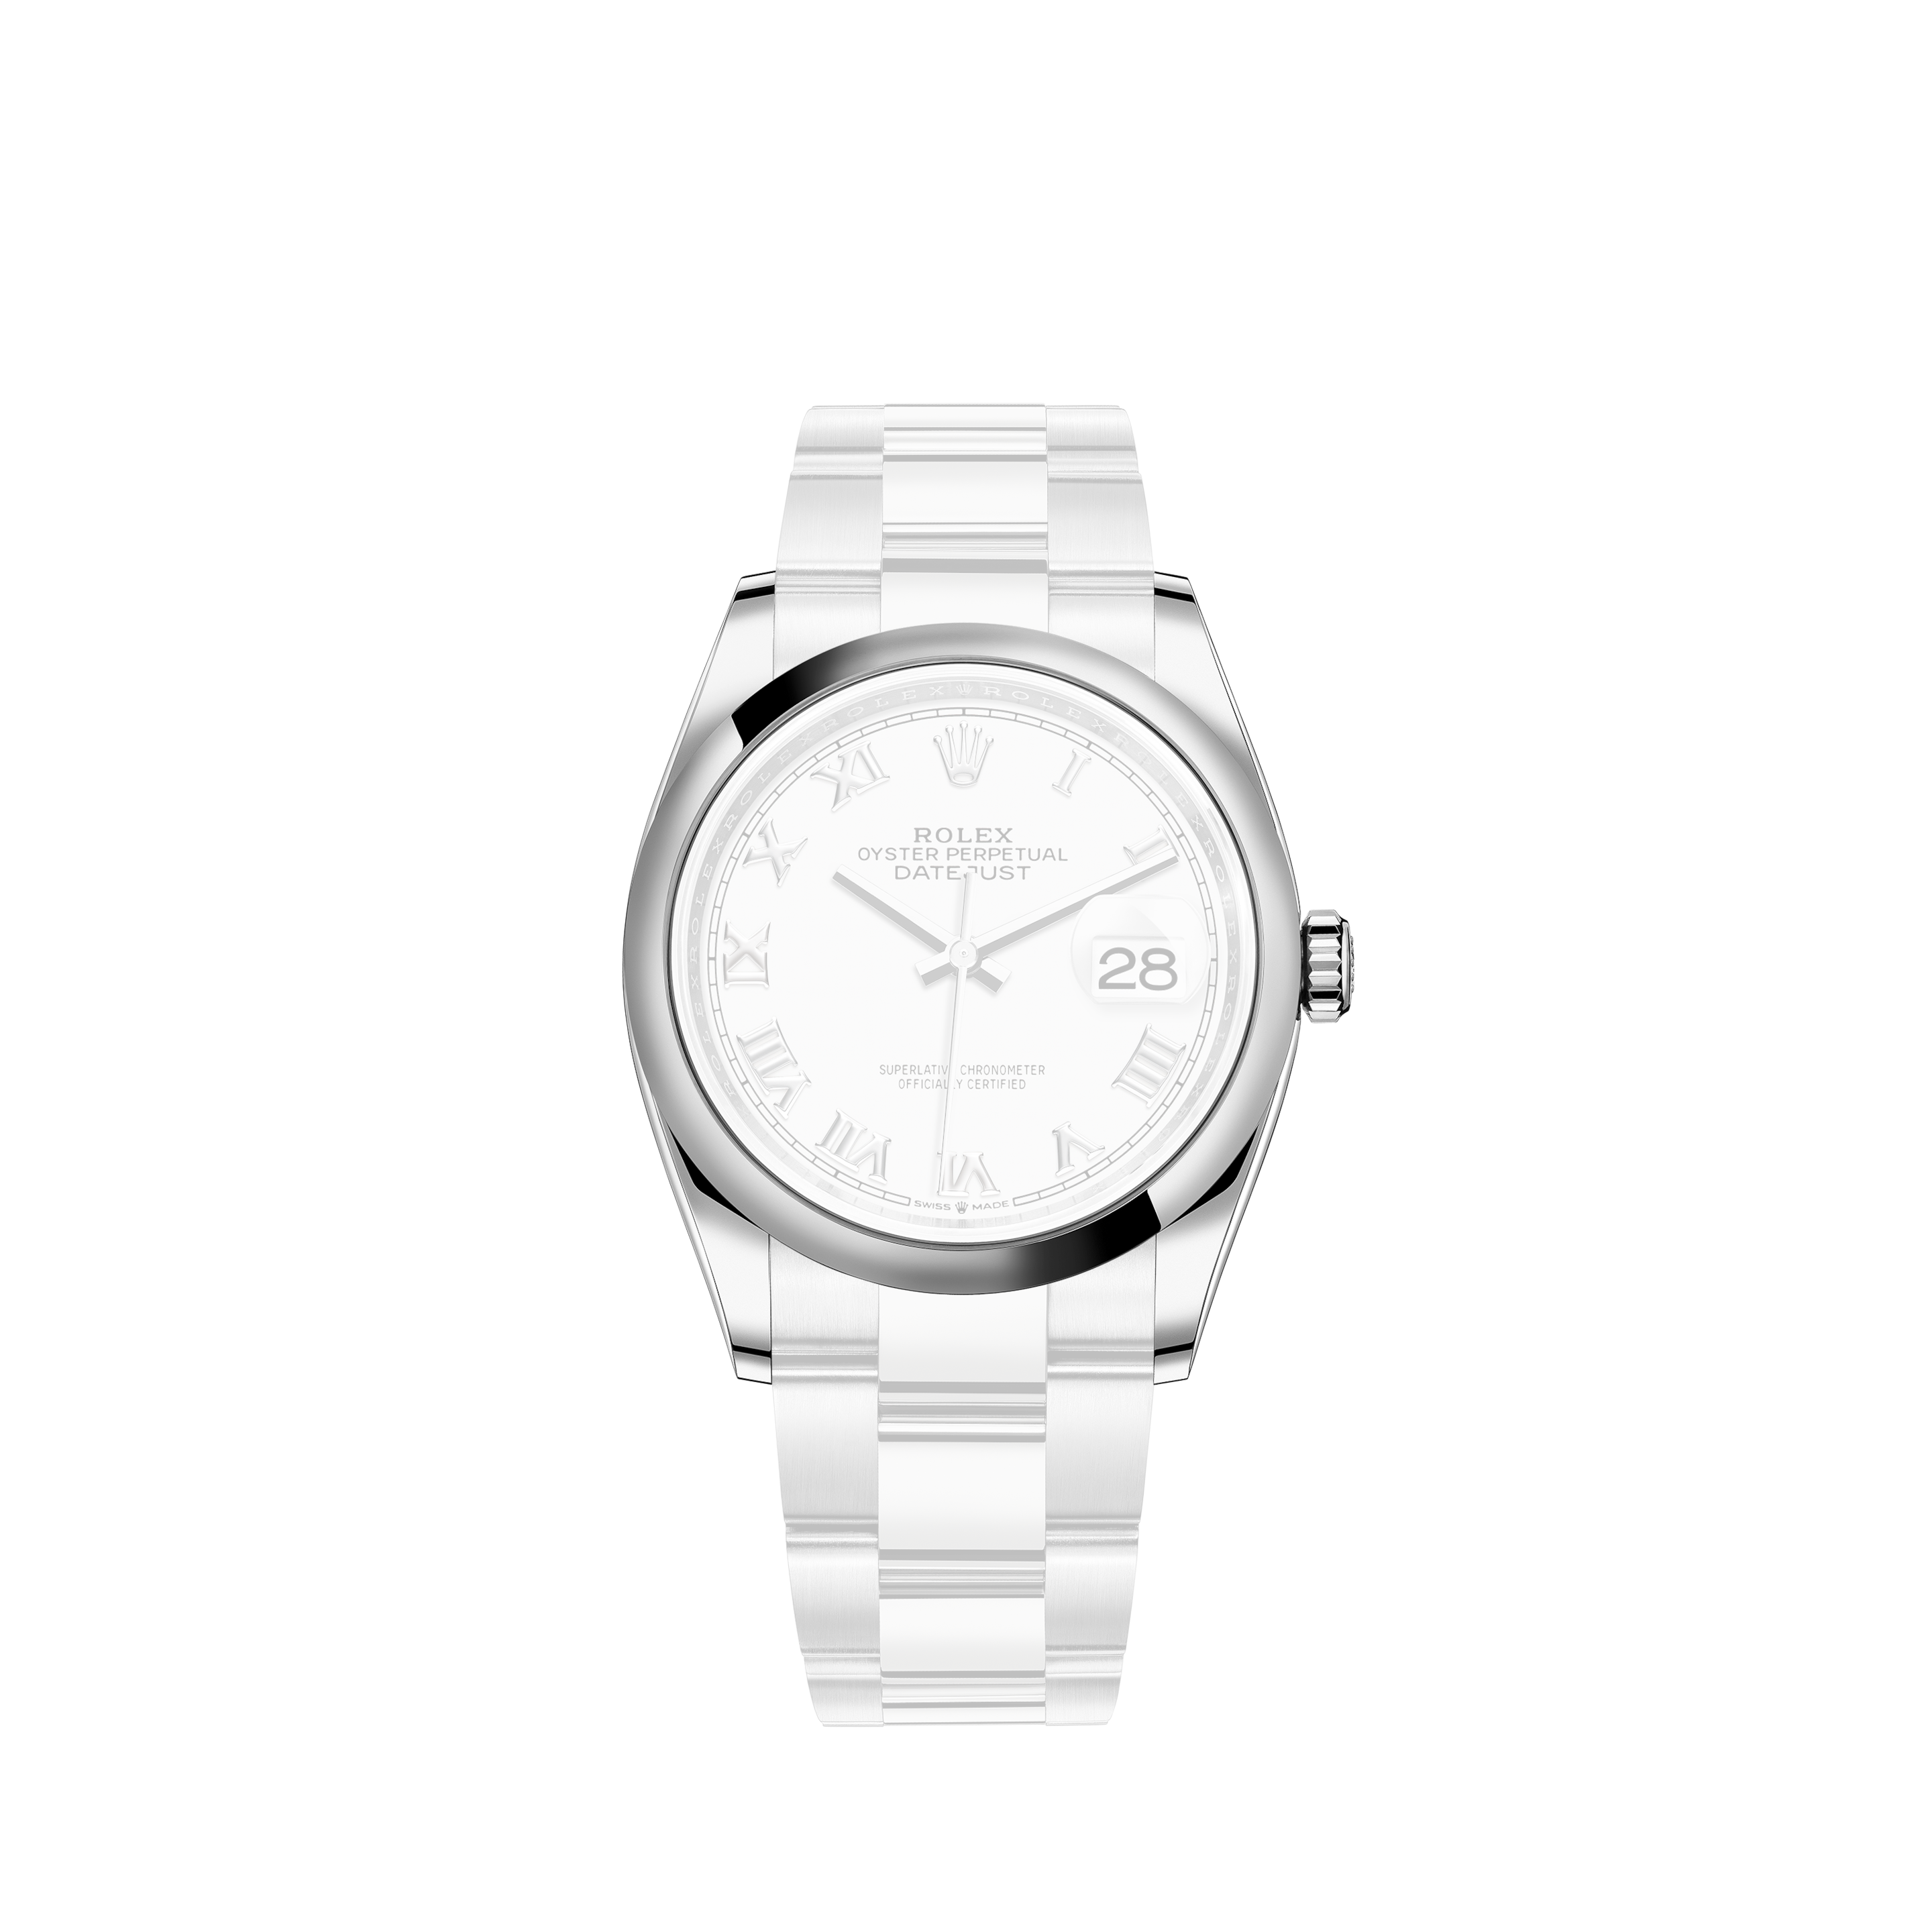 Rolex Datejust 36 126200 Boite / Papiers NEW 08/21Rolex Datejust 36 126200 Box and Papers September 2020